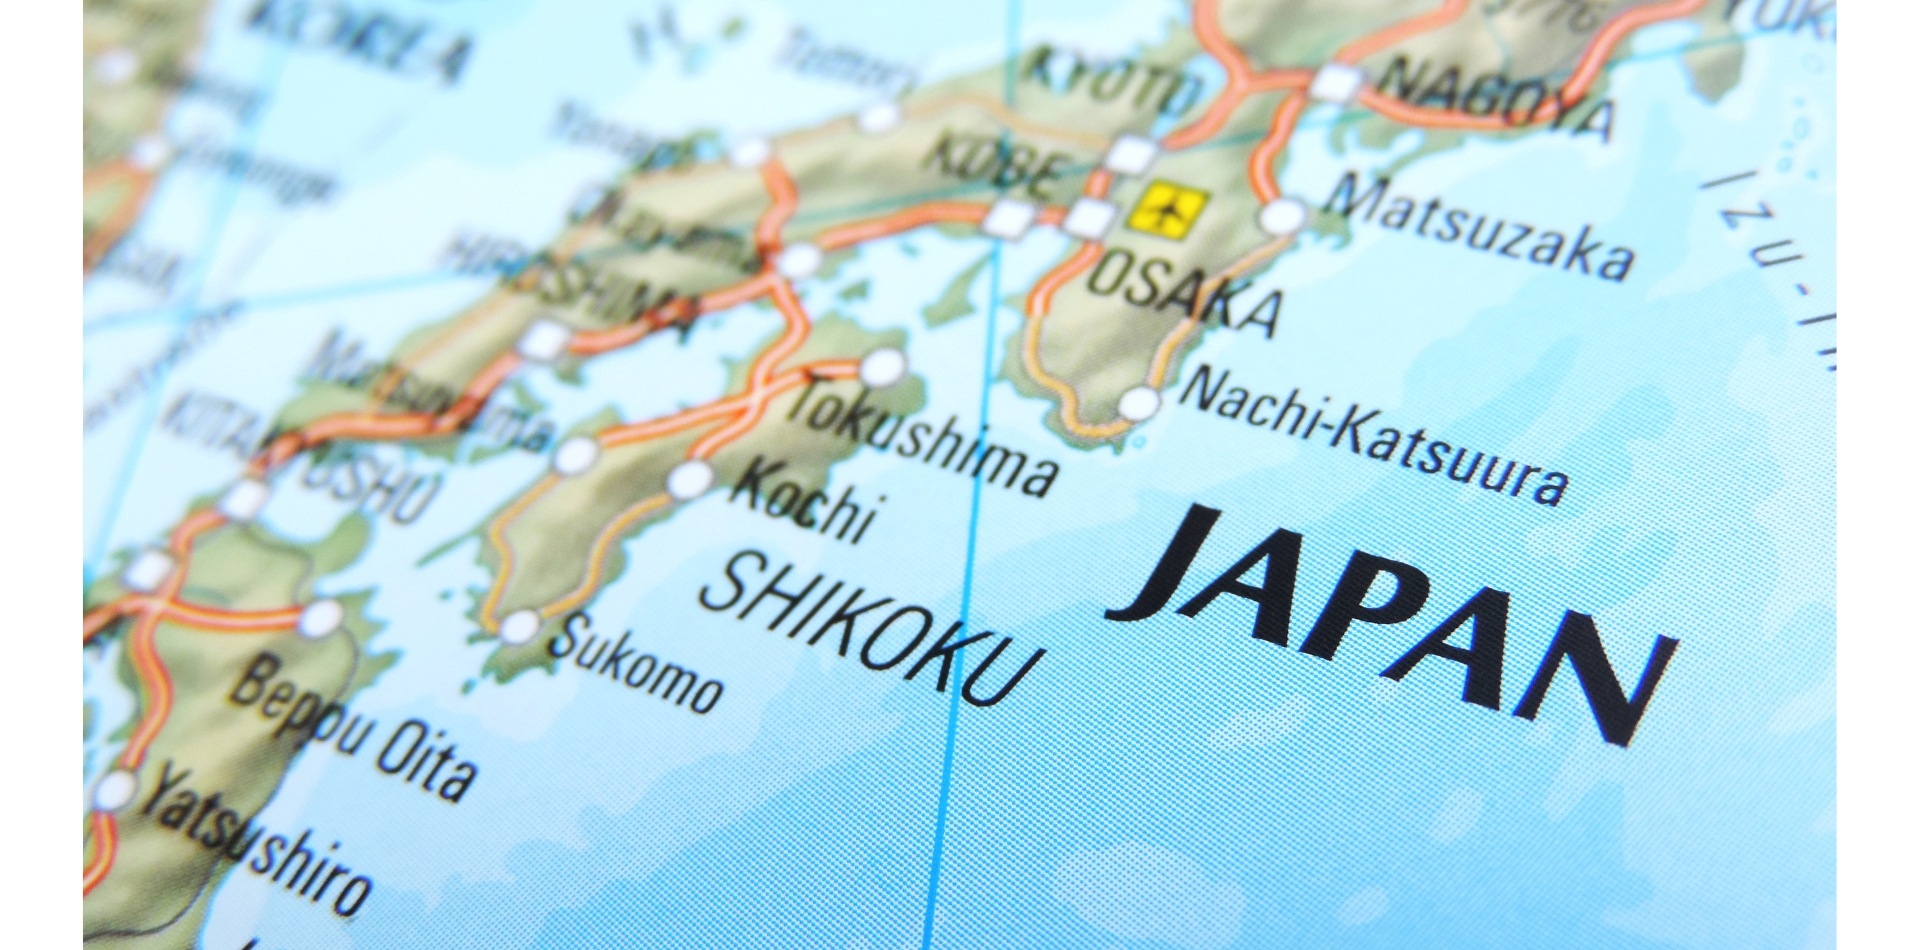 Japanese Cannabis Reform Is Almost Here